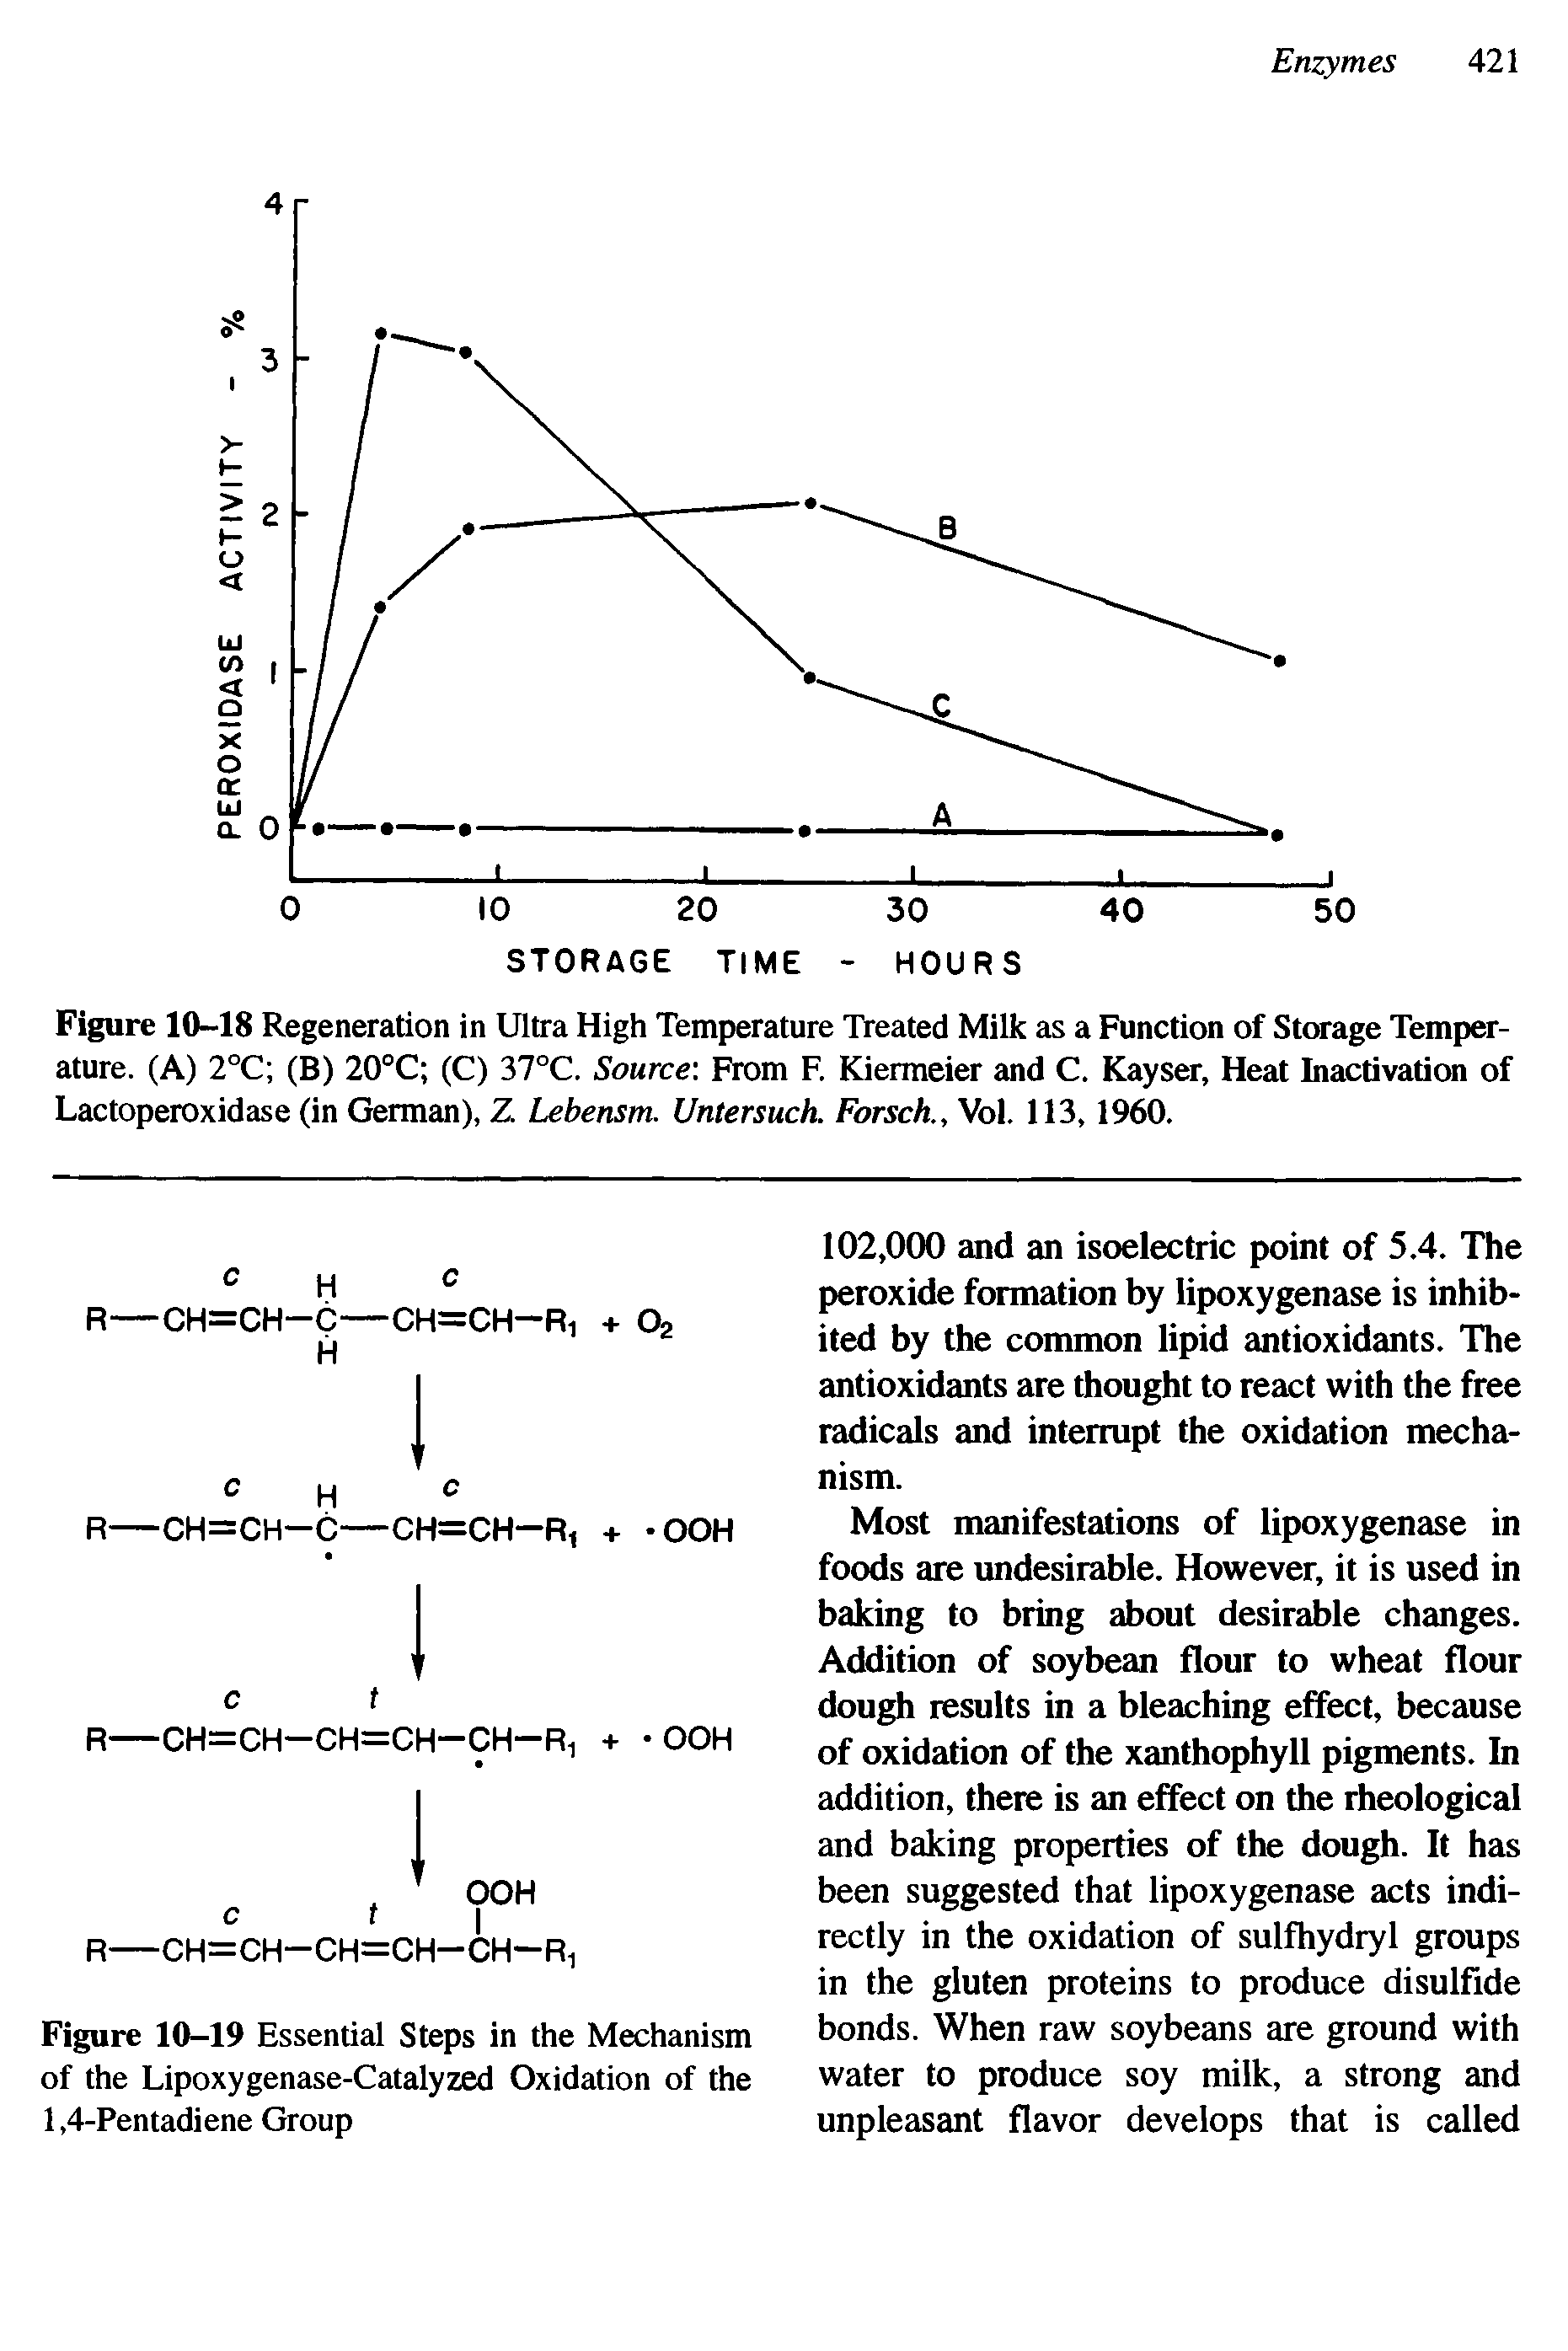 Figure 10-18 Regeneration in Ultra High Temperature Treated Milk as a Function of Storage Temperature. (A) 2°C (B) 20°C (C) 37°C. Source From F. Kiermeier and C. Kayser, Heat Inactivation of Lactoperoxidase (in German), Z Lebensm. Untersuch. Forsch., Vol. 113,1960.